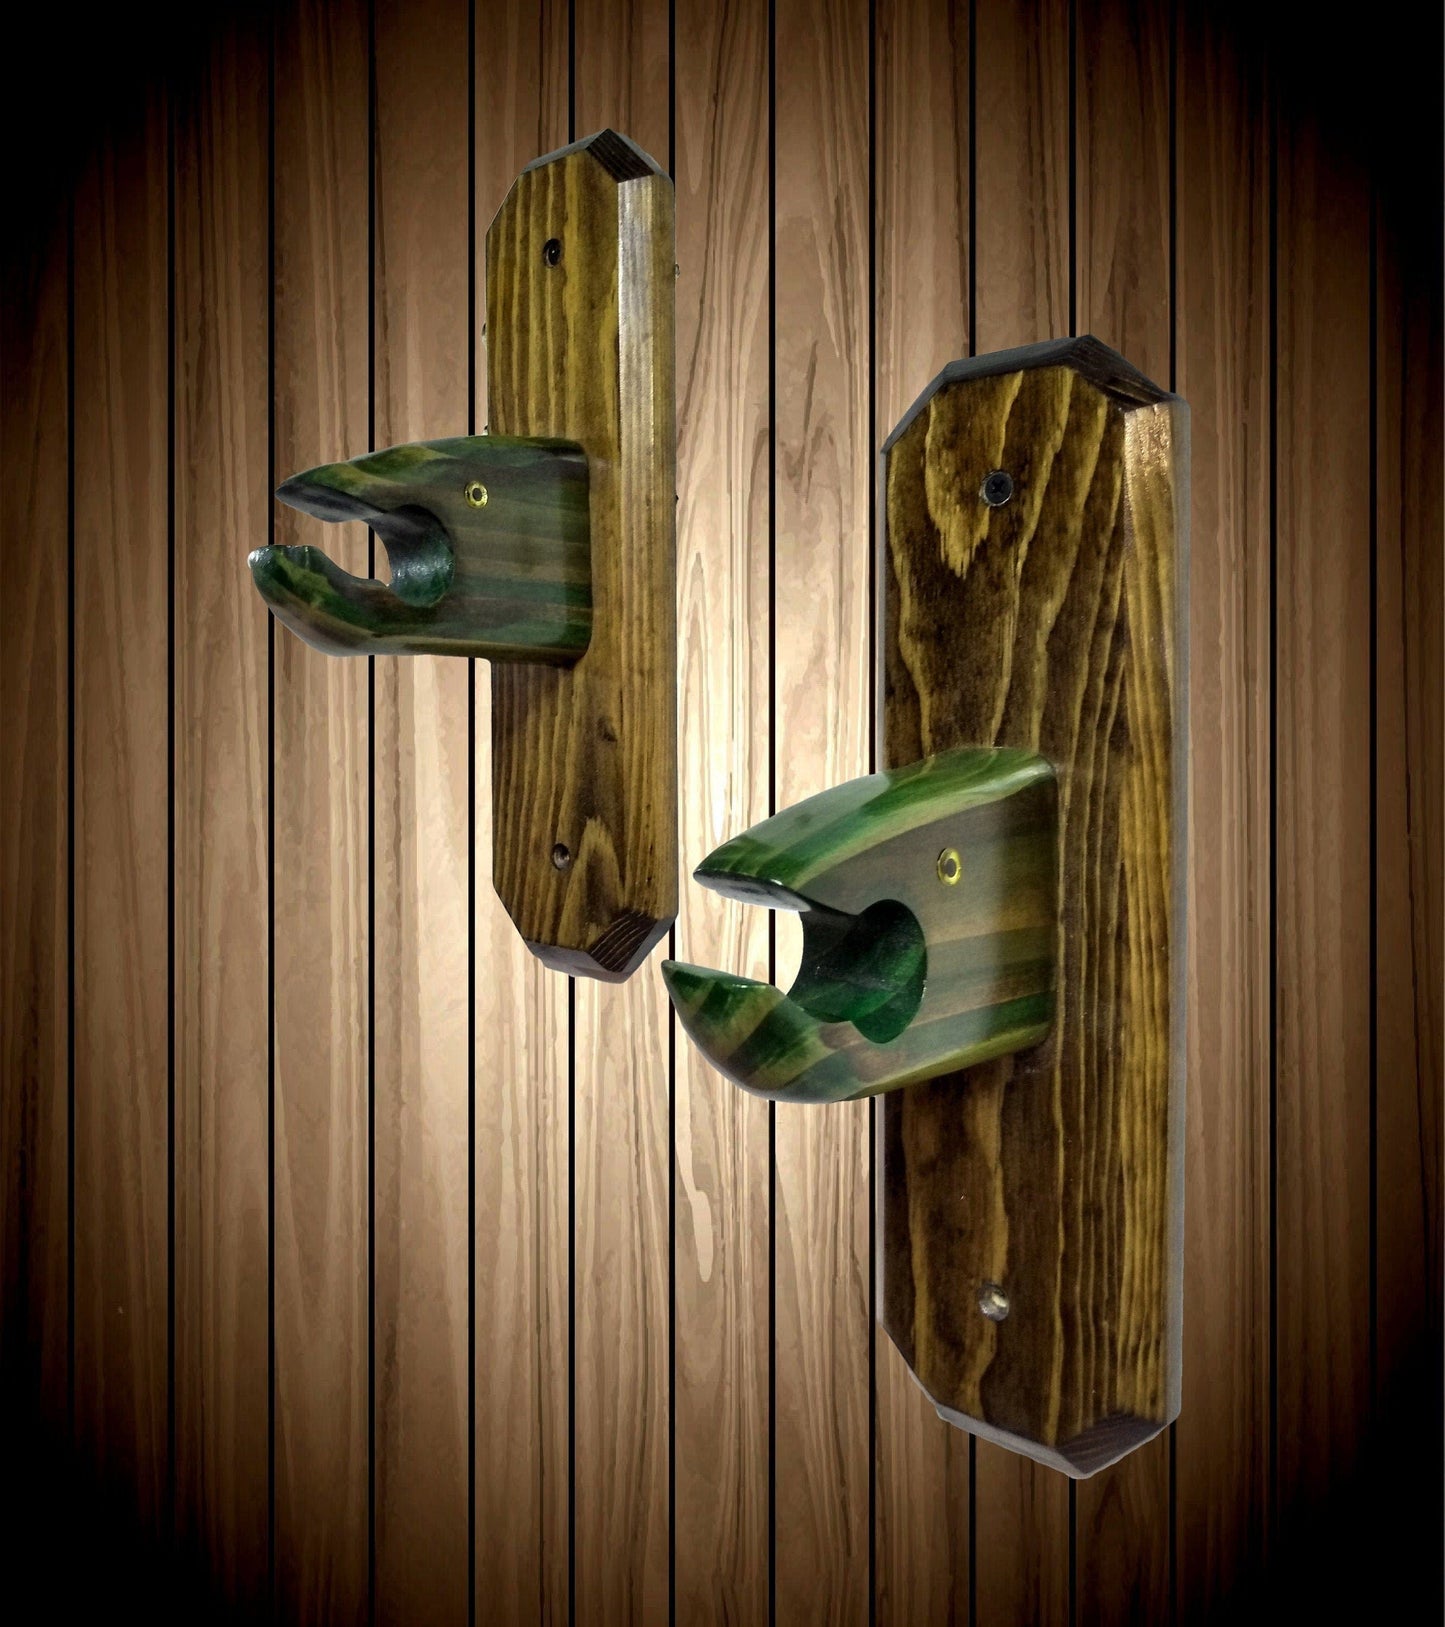 walkerwoodgifts FISH HOOK, WOODEN Hooks, Rustic Wall Mounted Green Hand Painted Wooden Fish Head Holders Pair, House Warming Gift